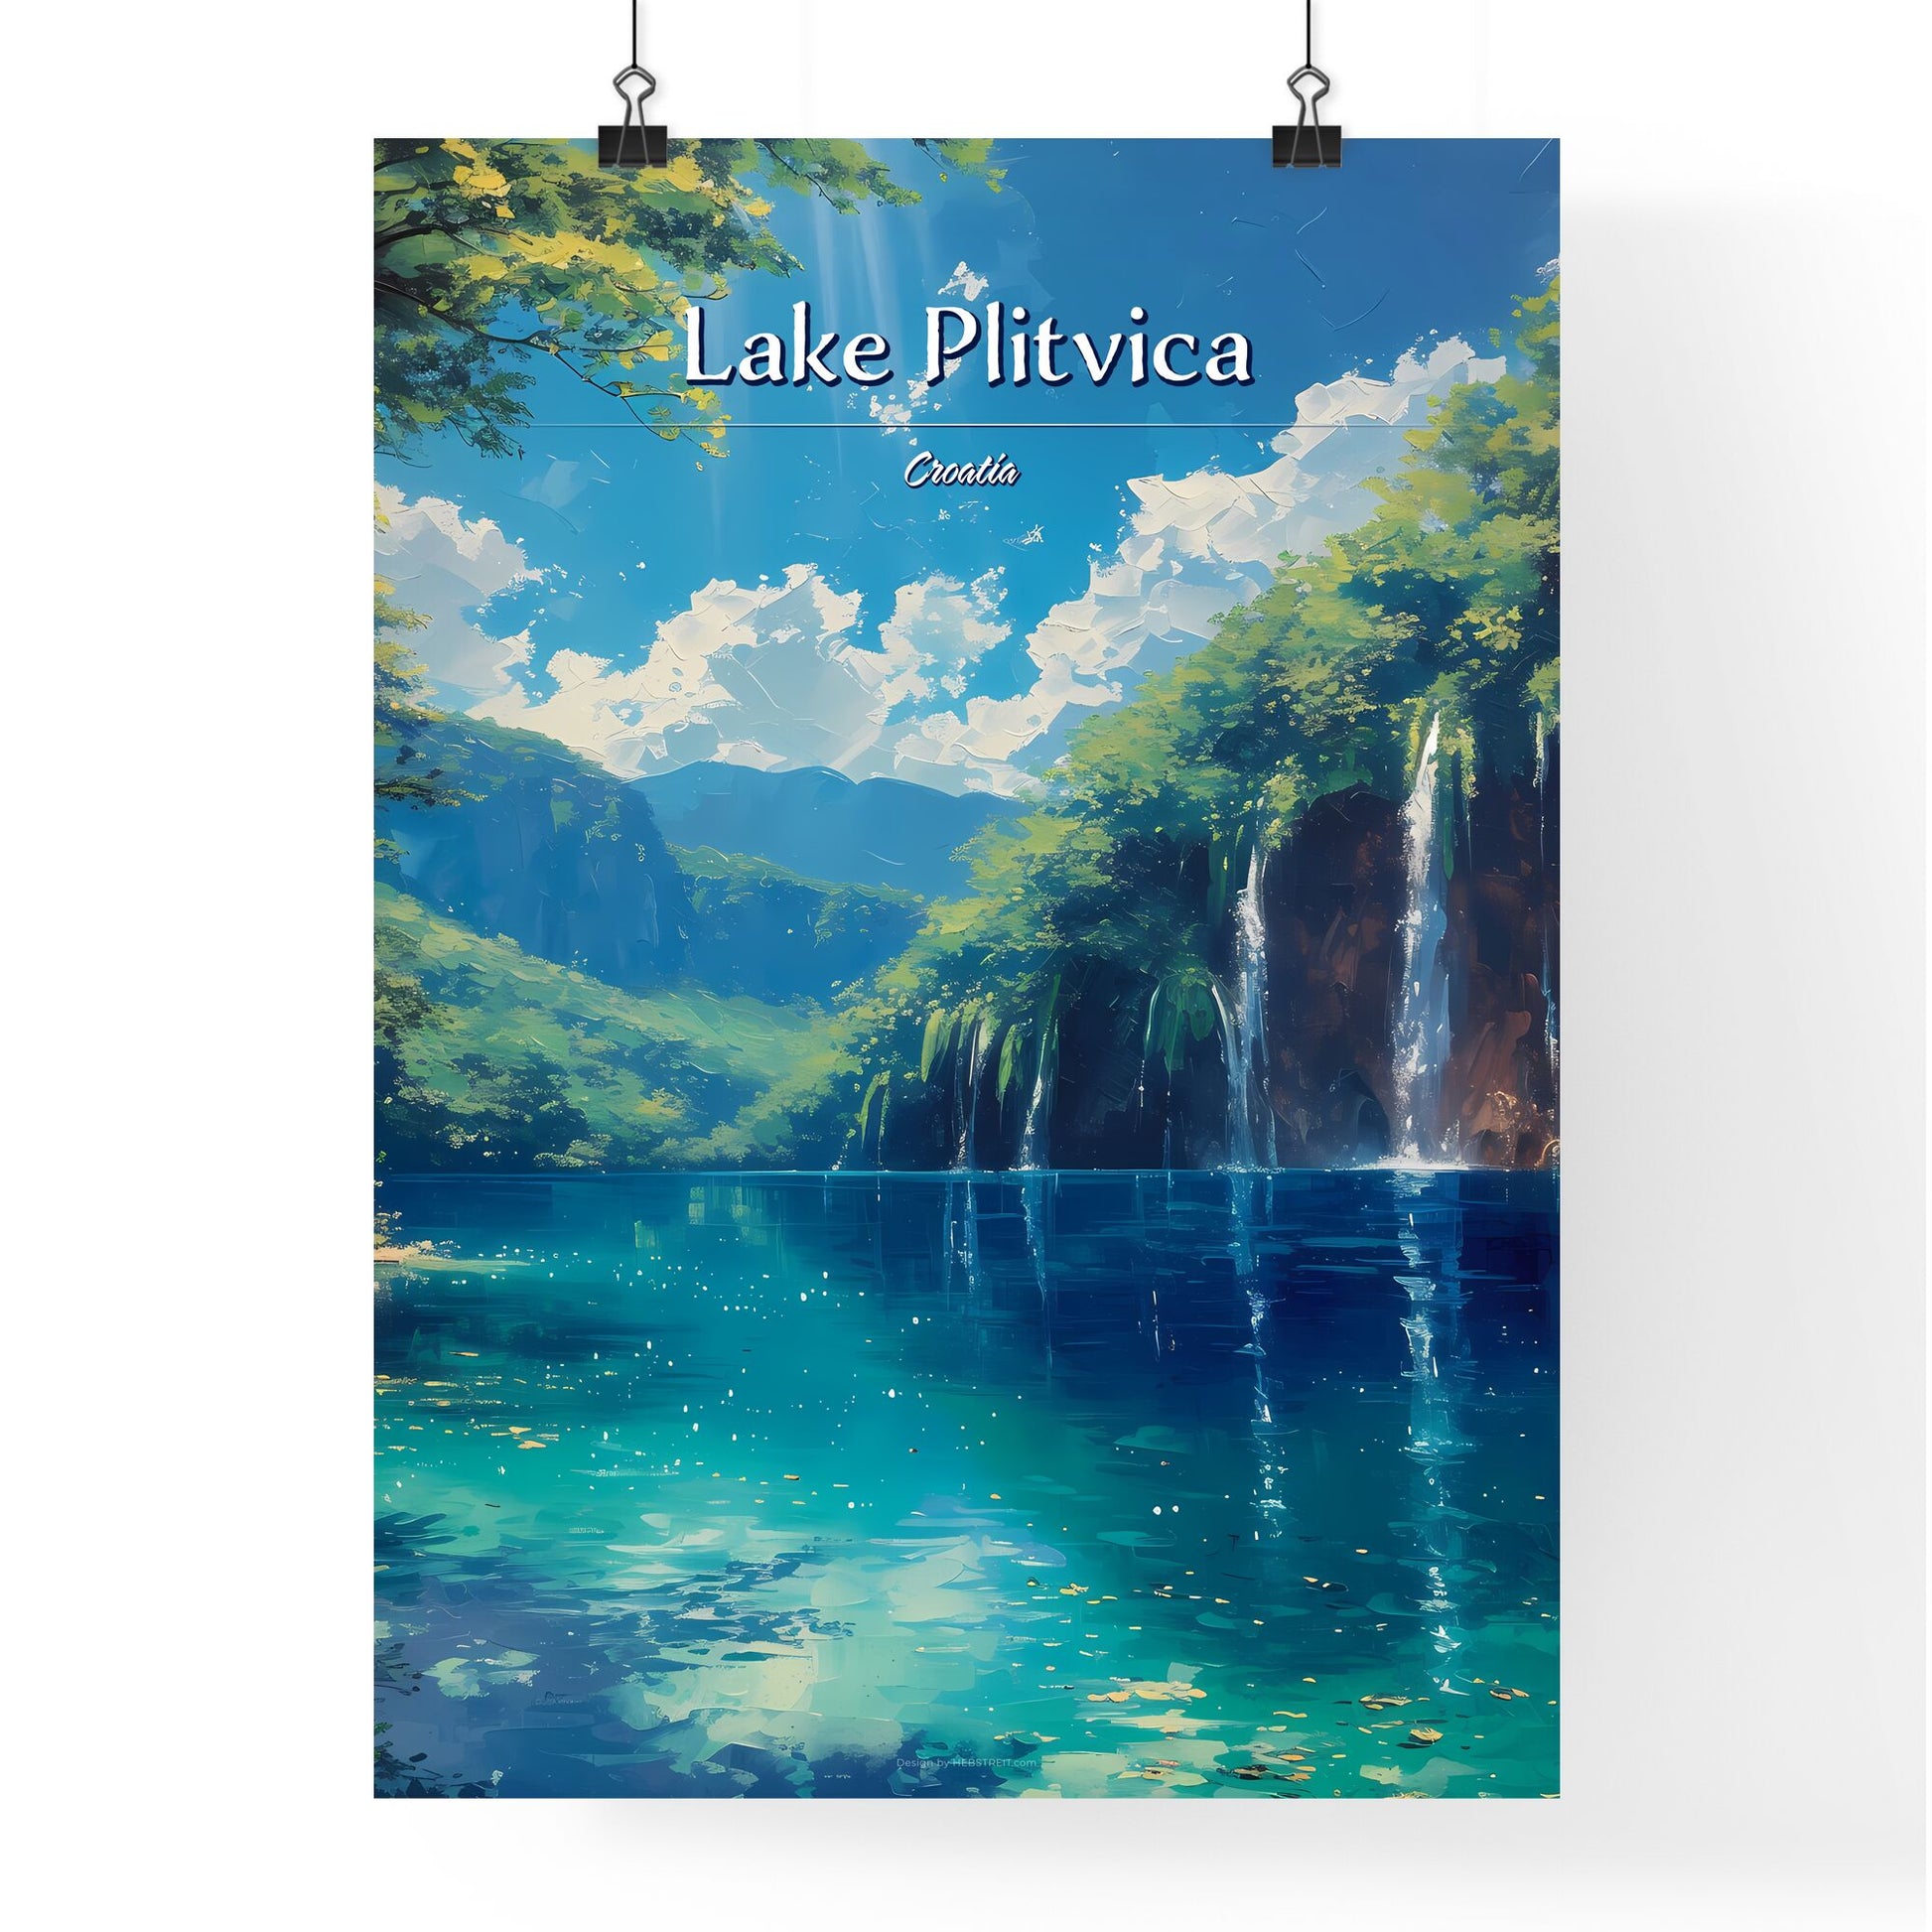 Lake Plitvica, Croatia - Art print of a painting of a street with colorful buildings Default Title